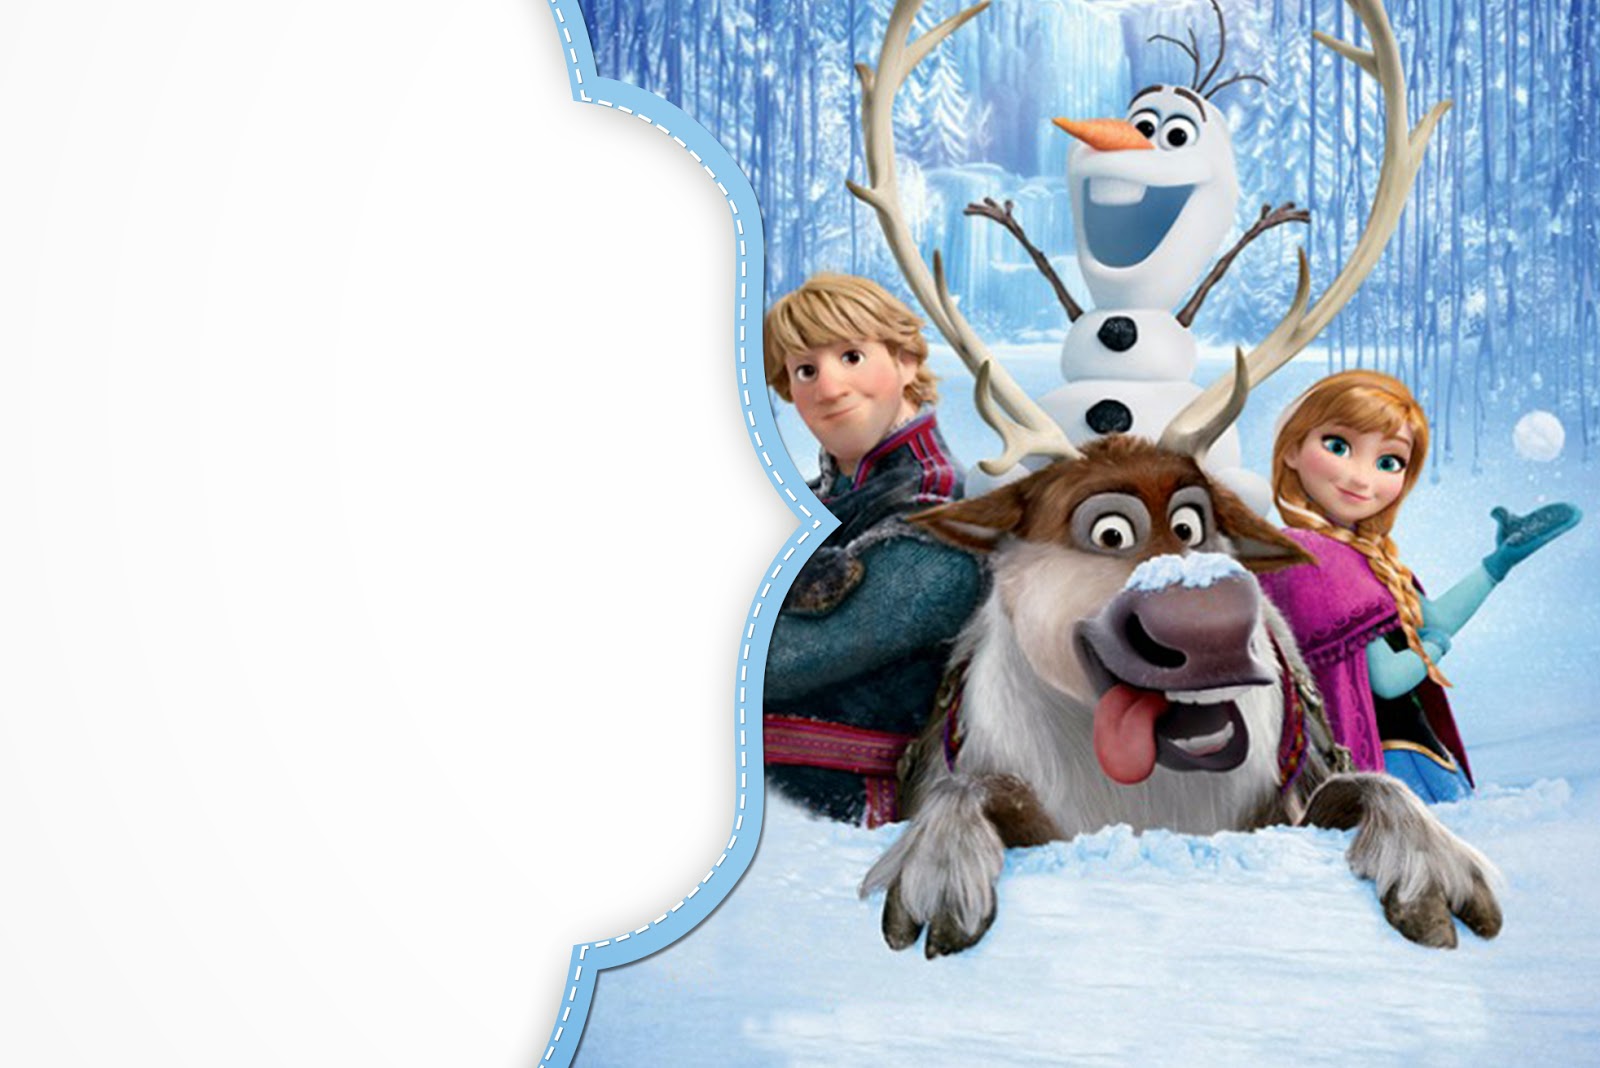 Is the quality better if you download or stream the movie Frozen?